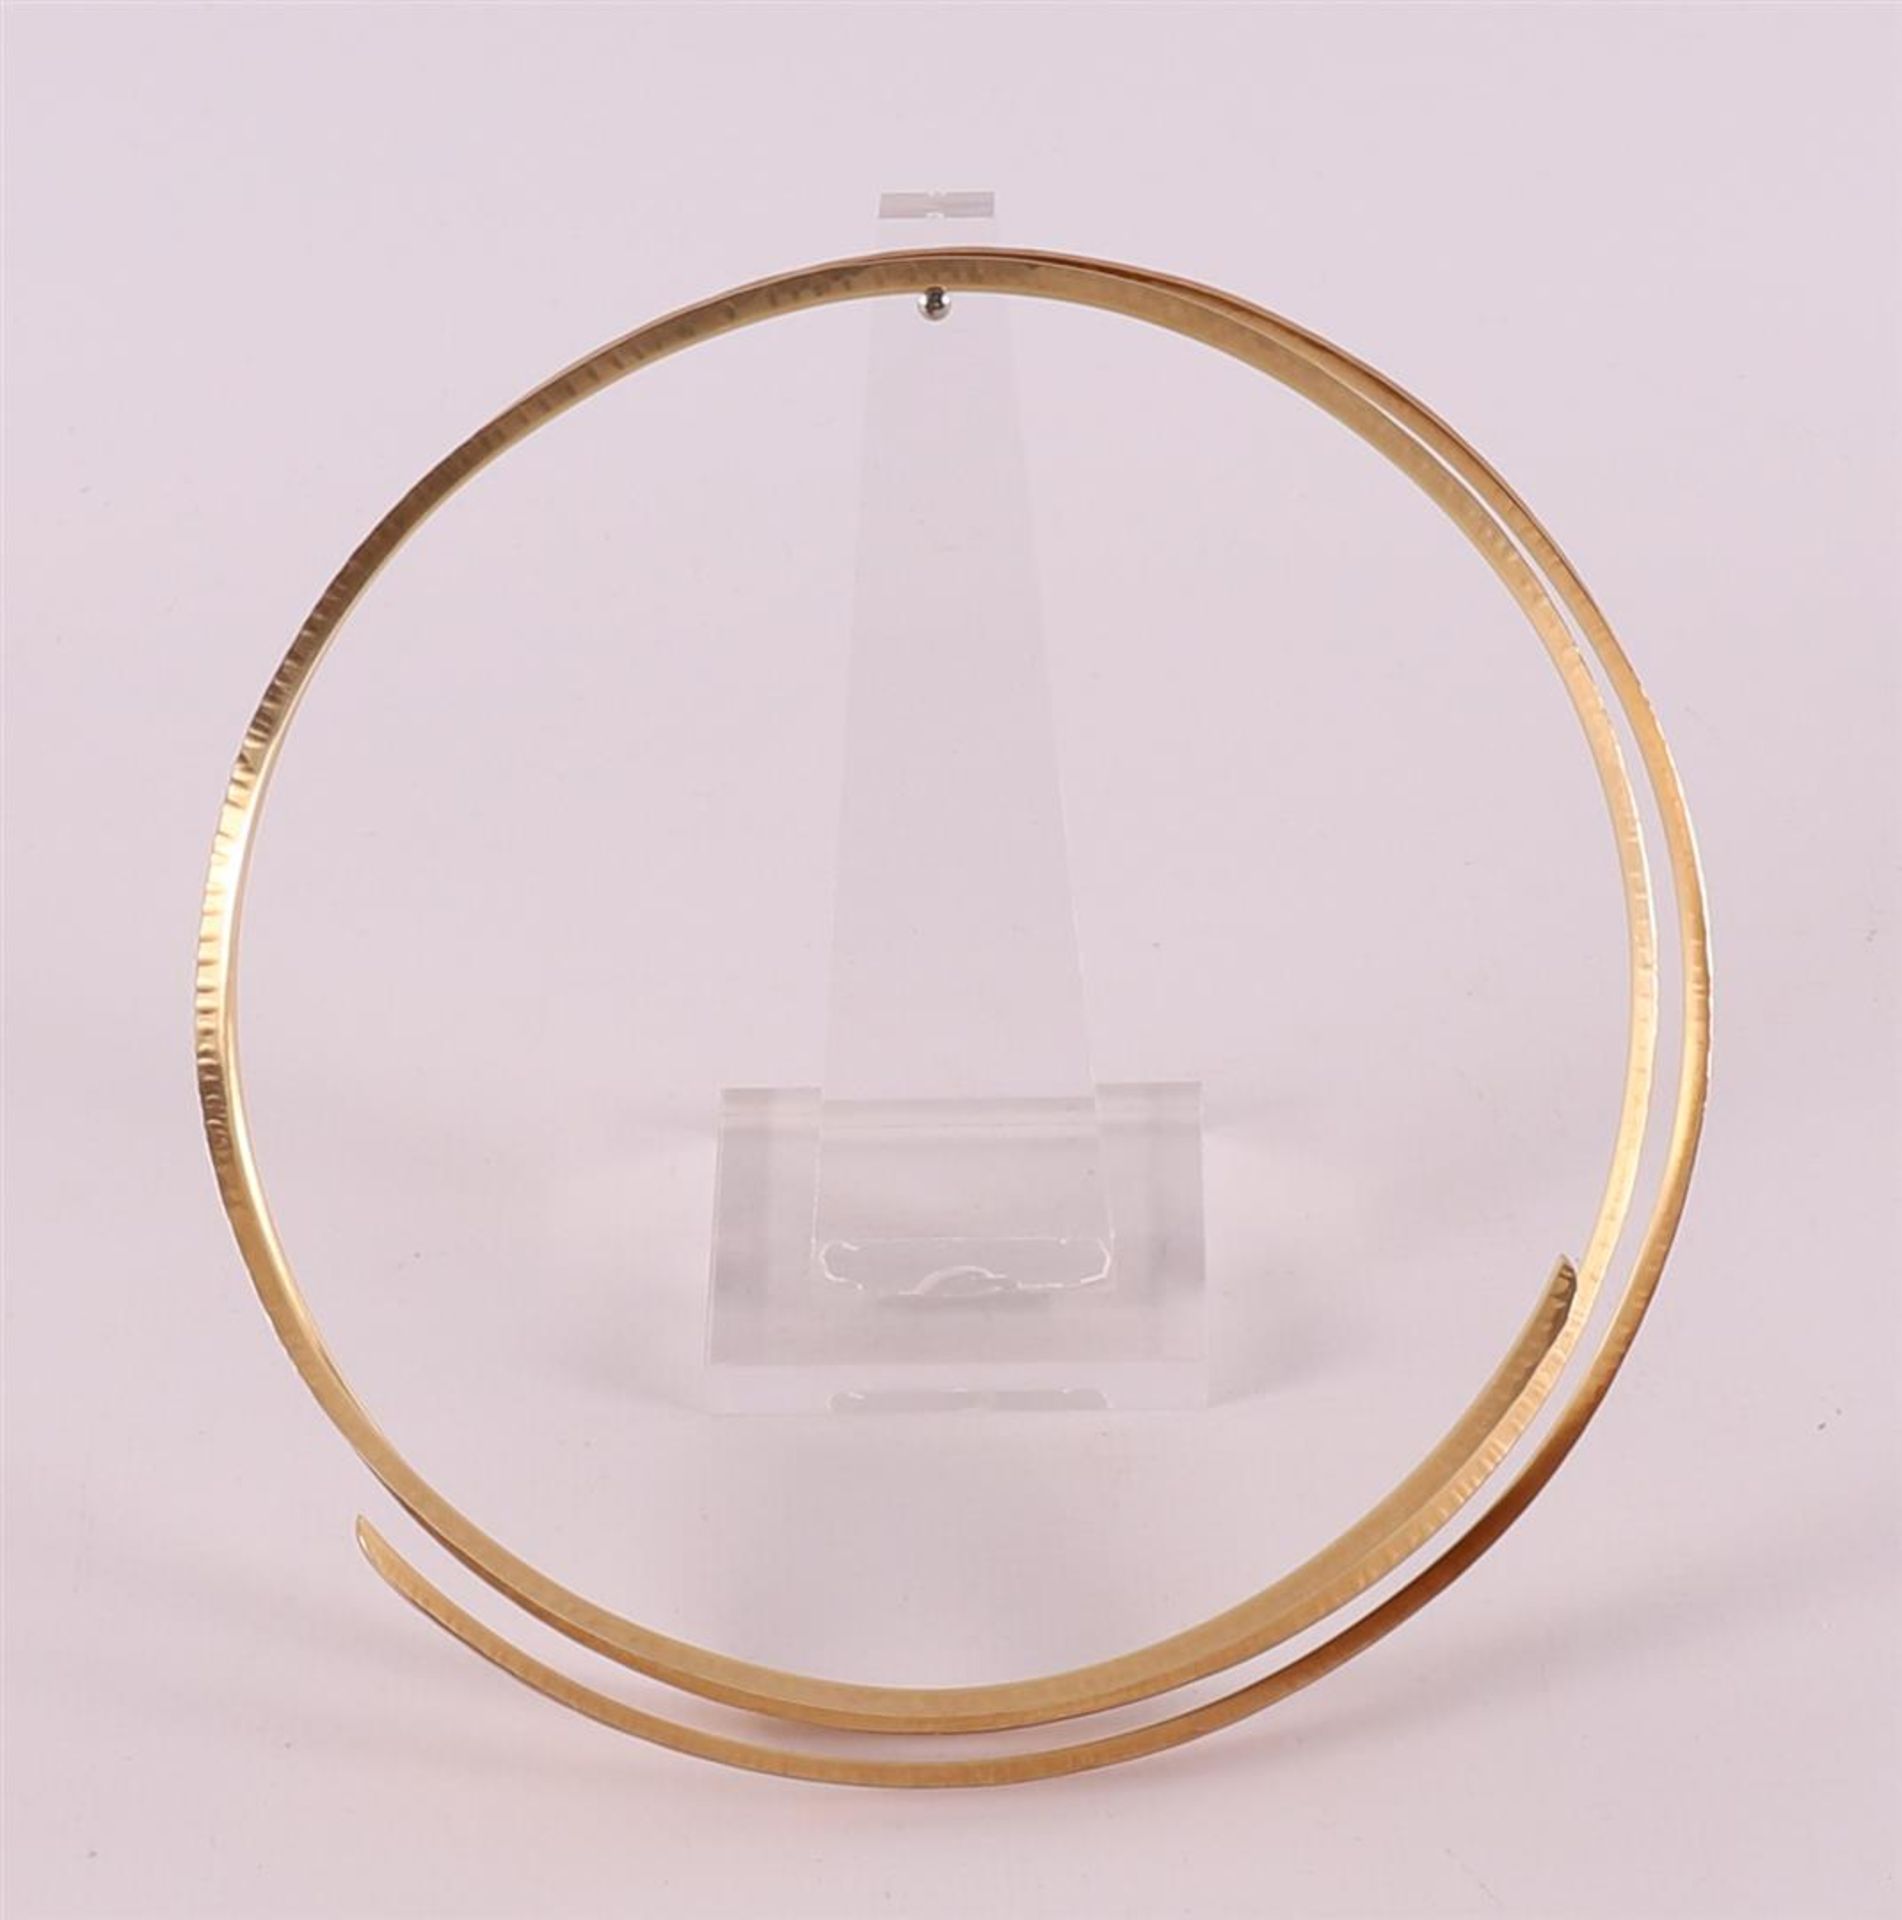 A round spiral matted 14 kt 585/1000 yellow gold choker. - Image 2 of 4